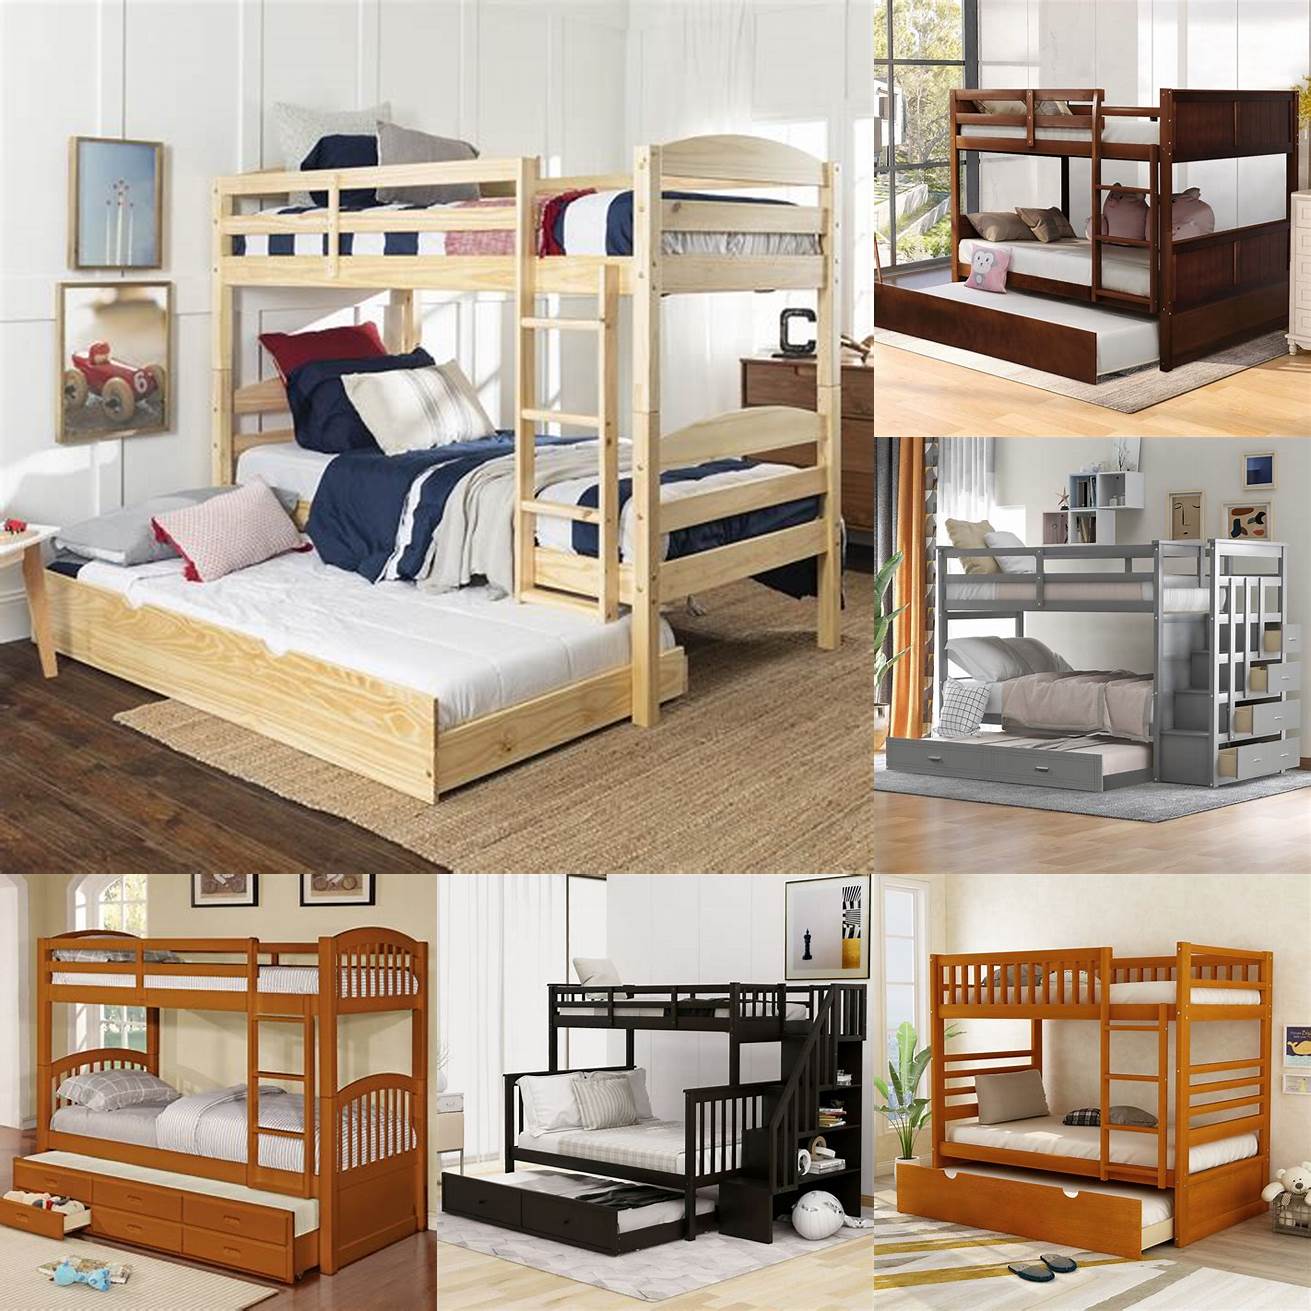 Wooden boys bunk bed with trundle bed